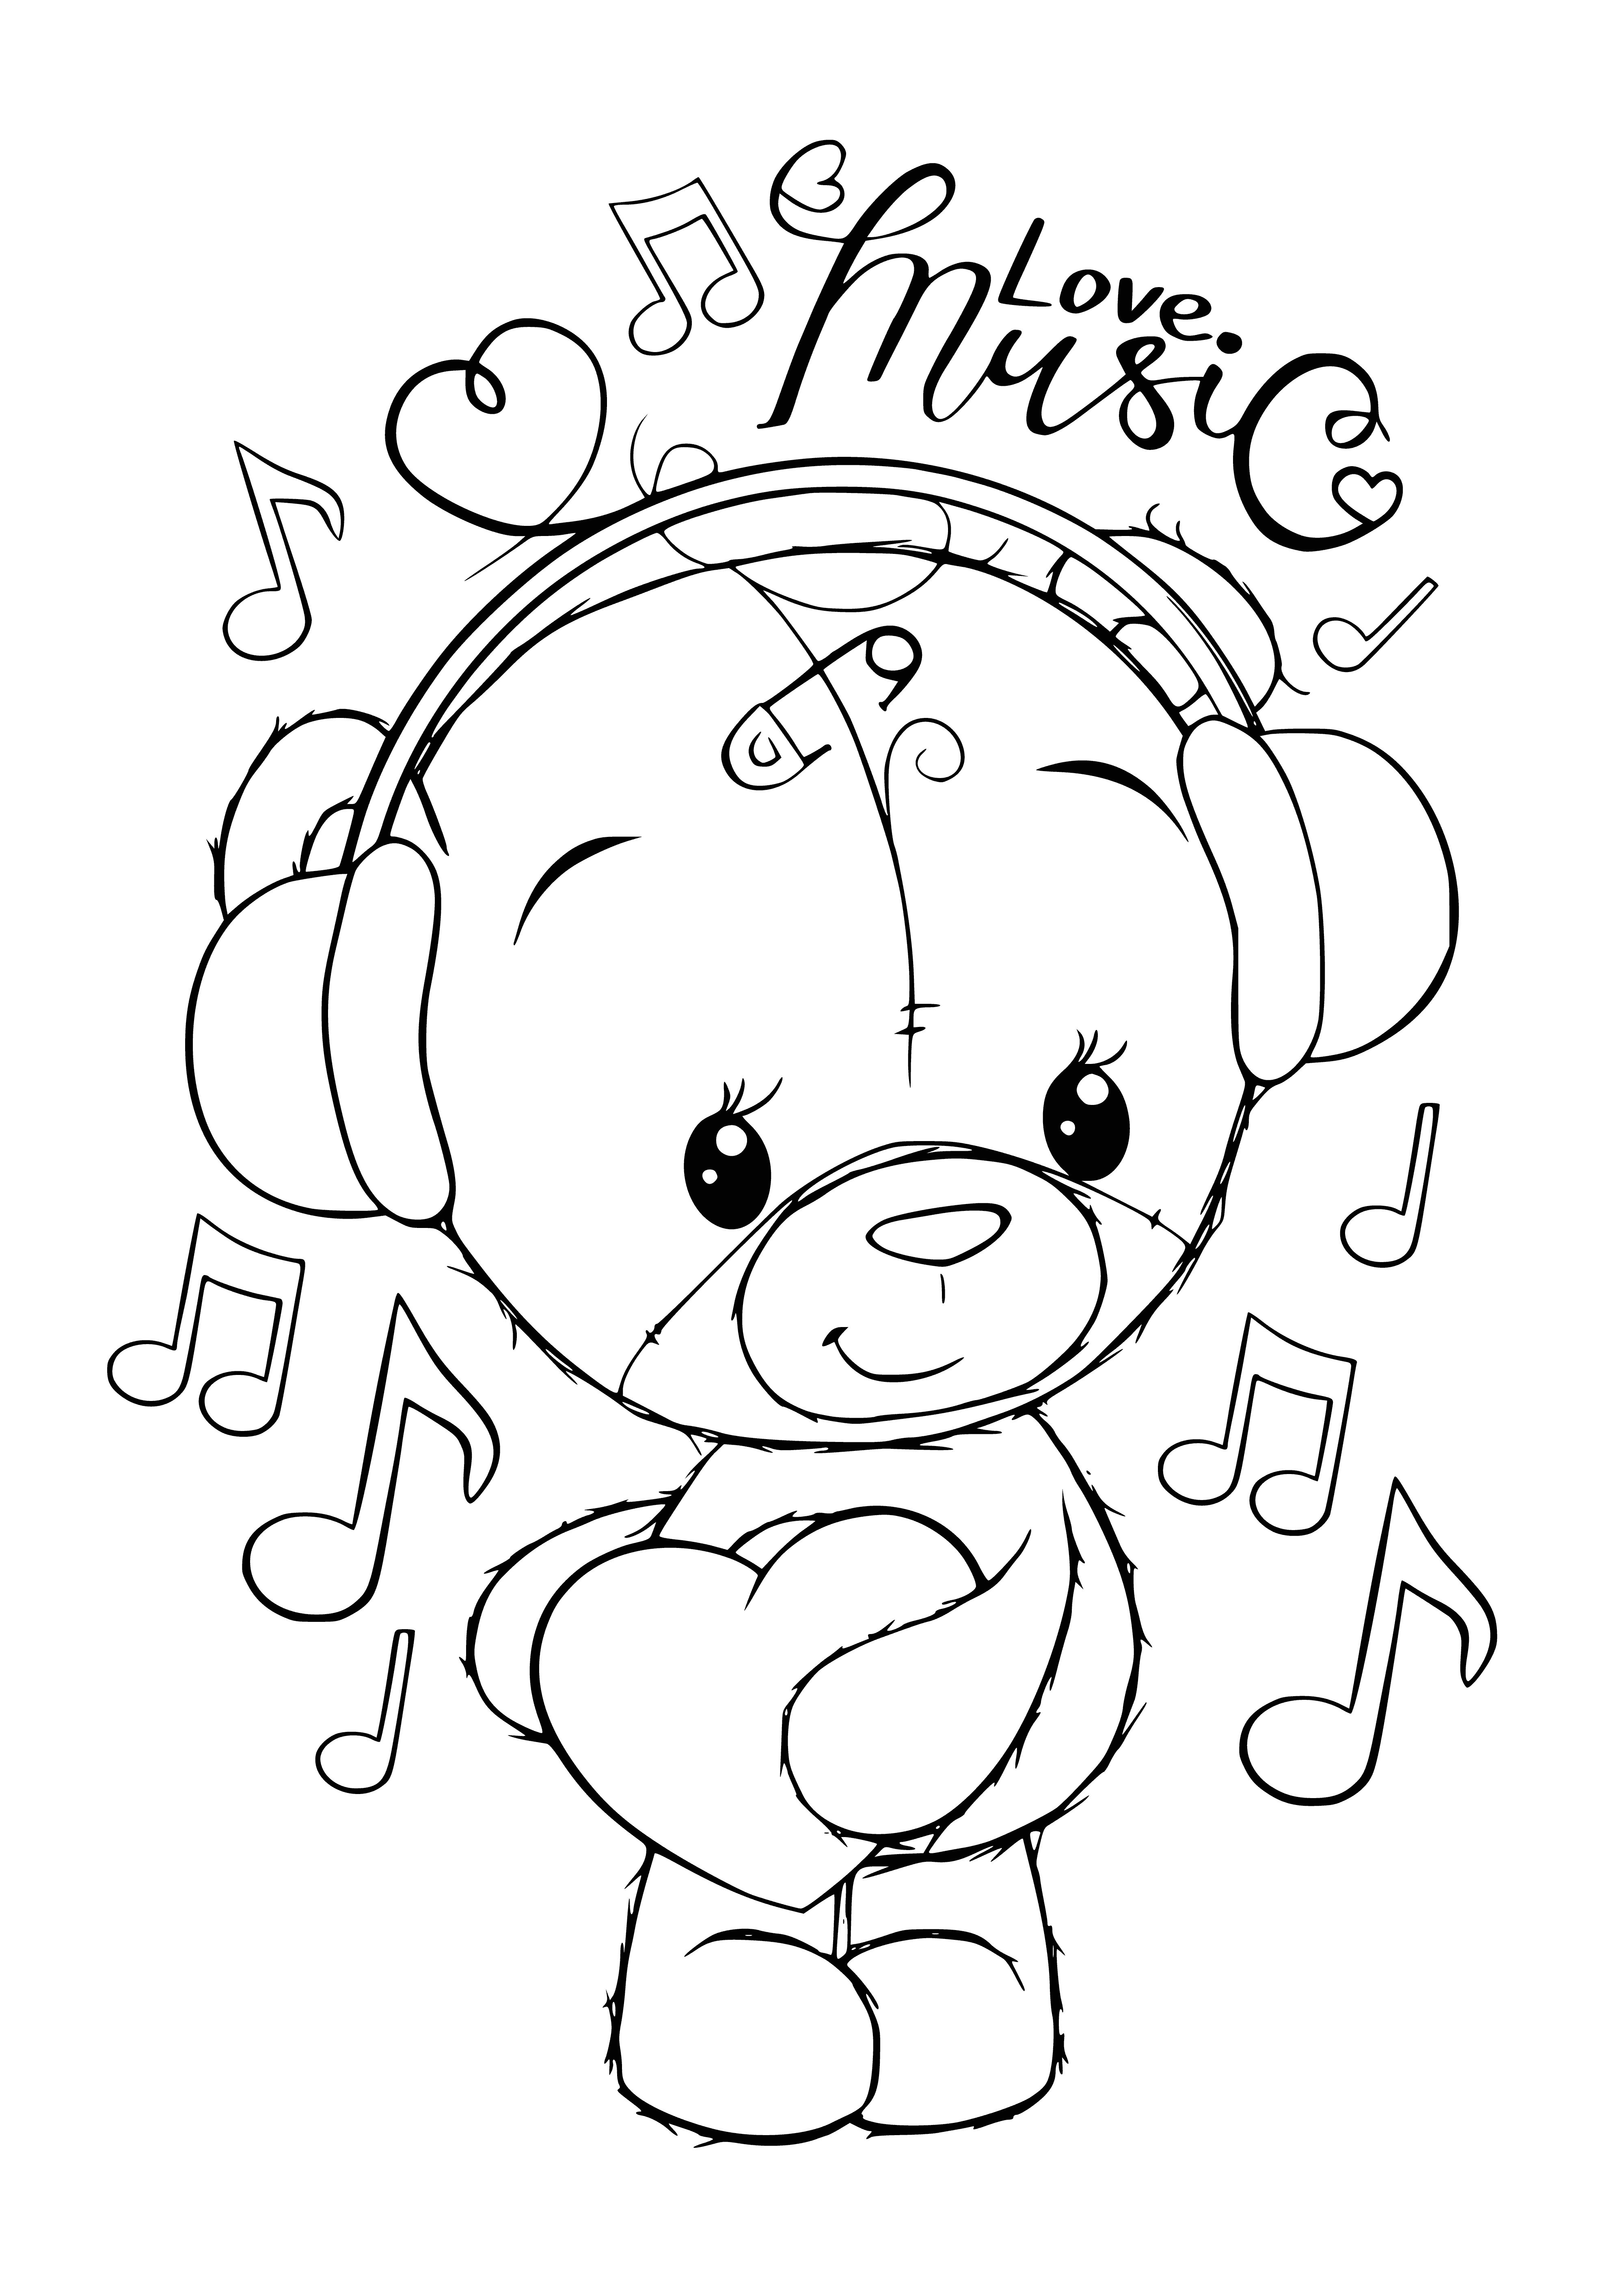 Teddy bear with heart coloring page